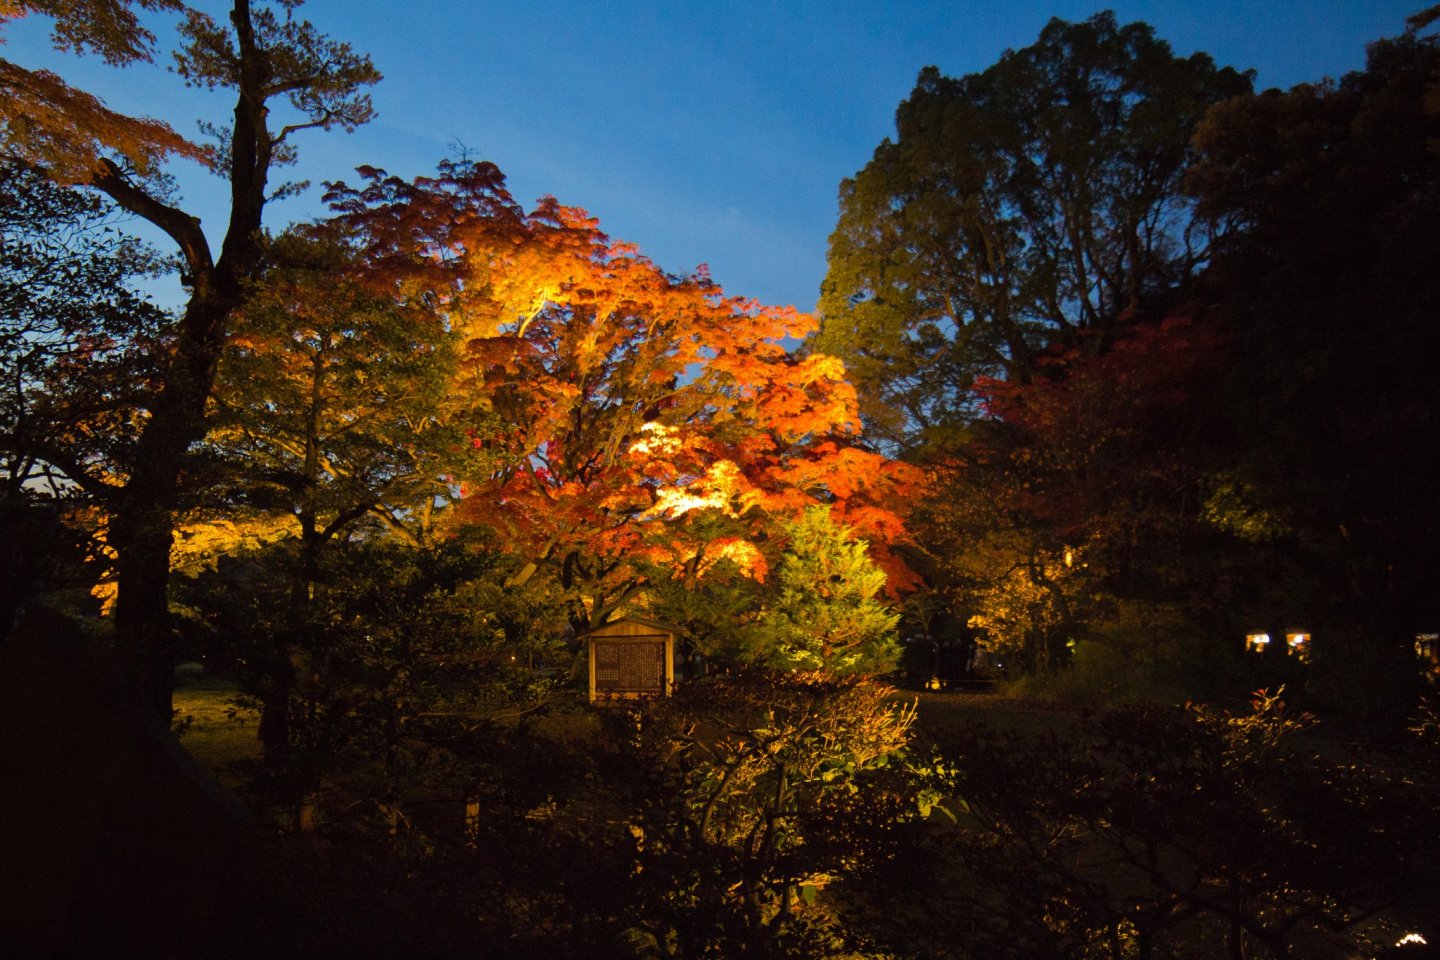 As soon as you enter the gardens, you are greeted by fantastic autumn leaves